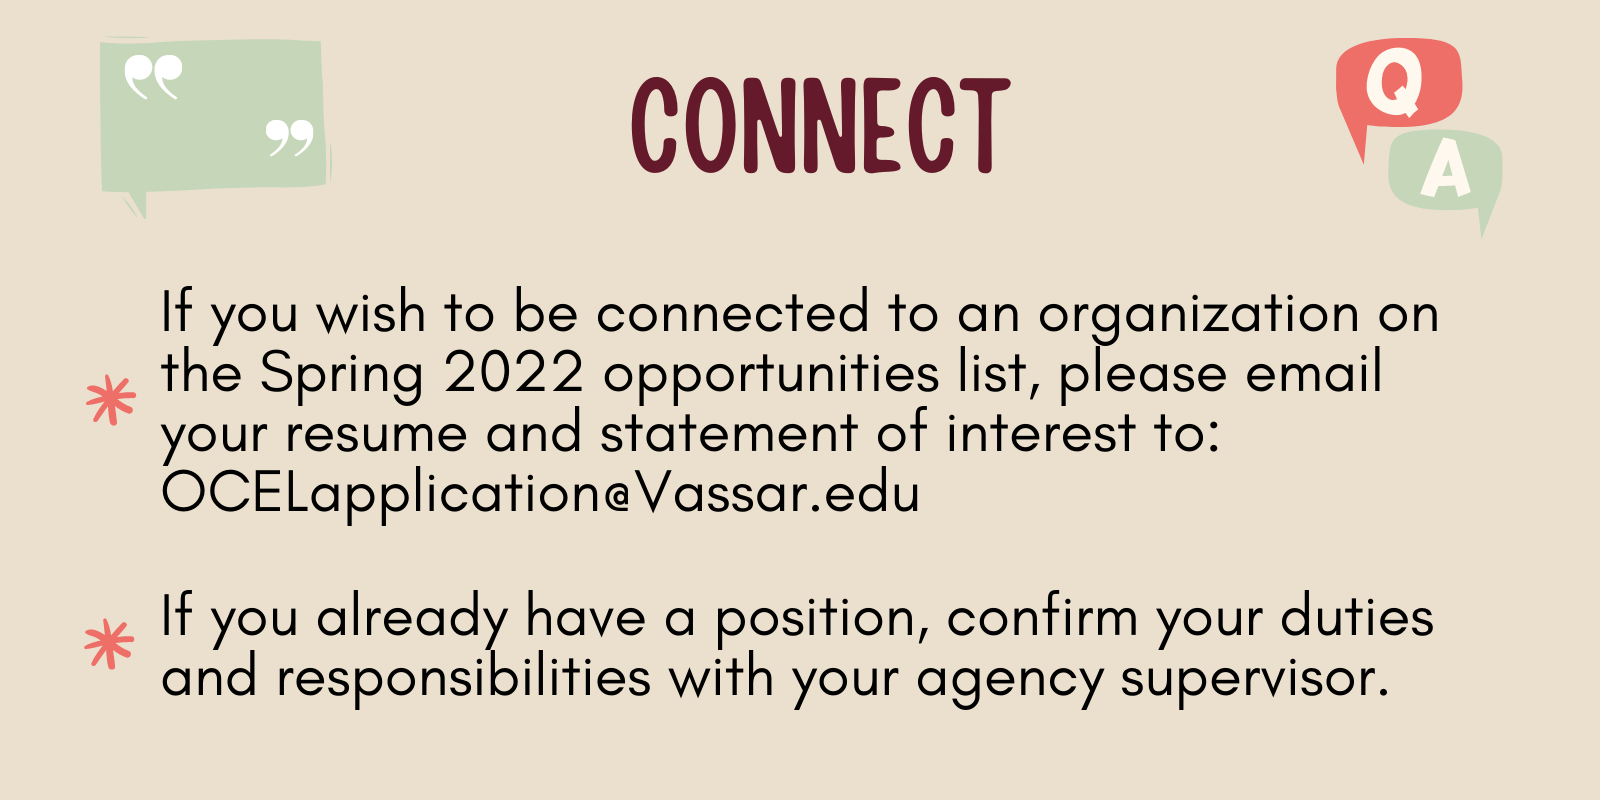 email your resume and statement of interest to OCELApplication@vassar.edu